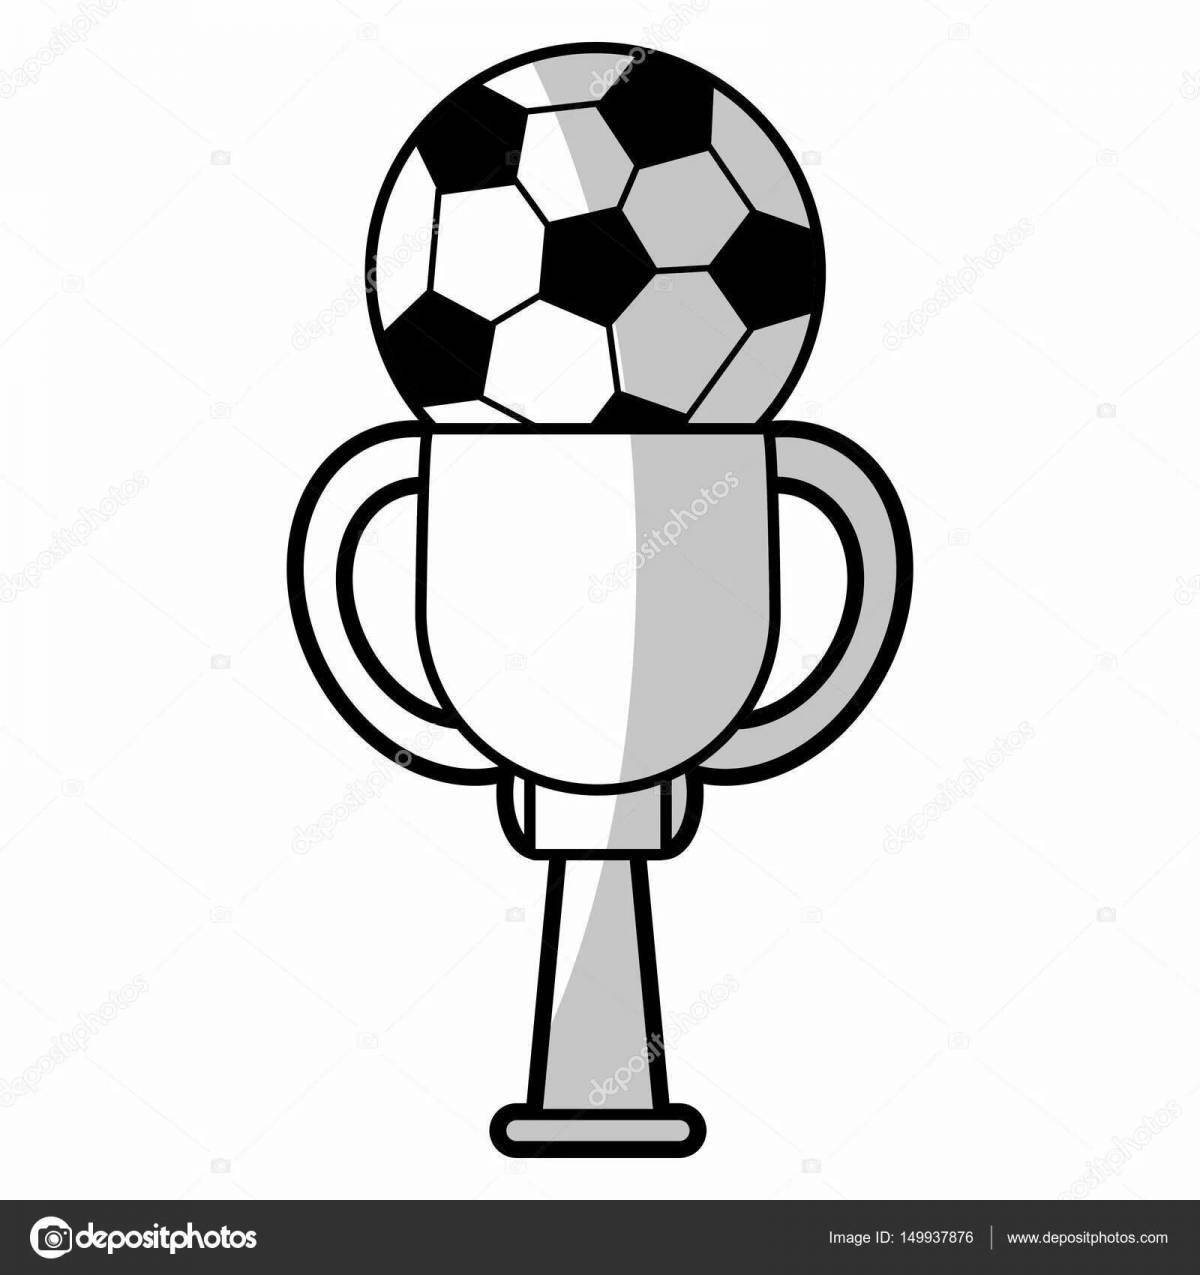 Football World Cup coloring page